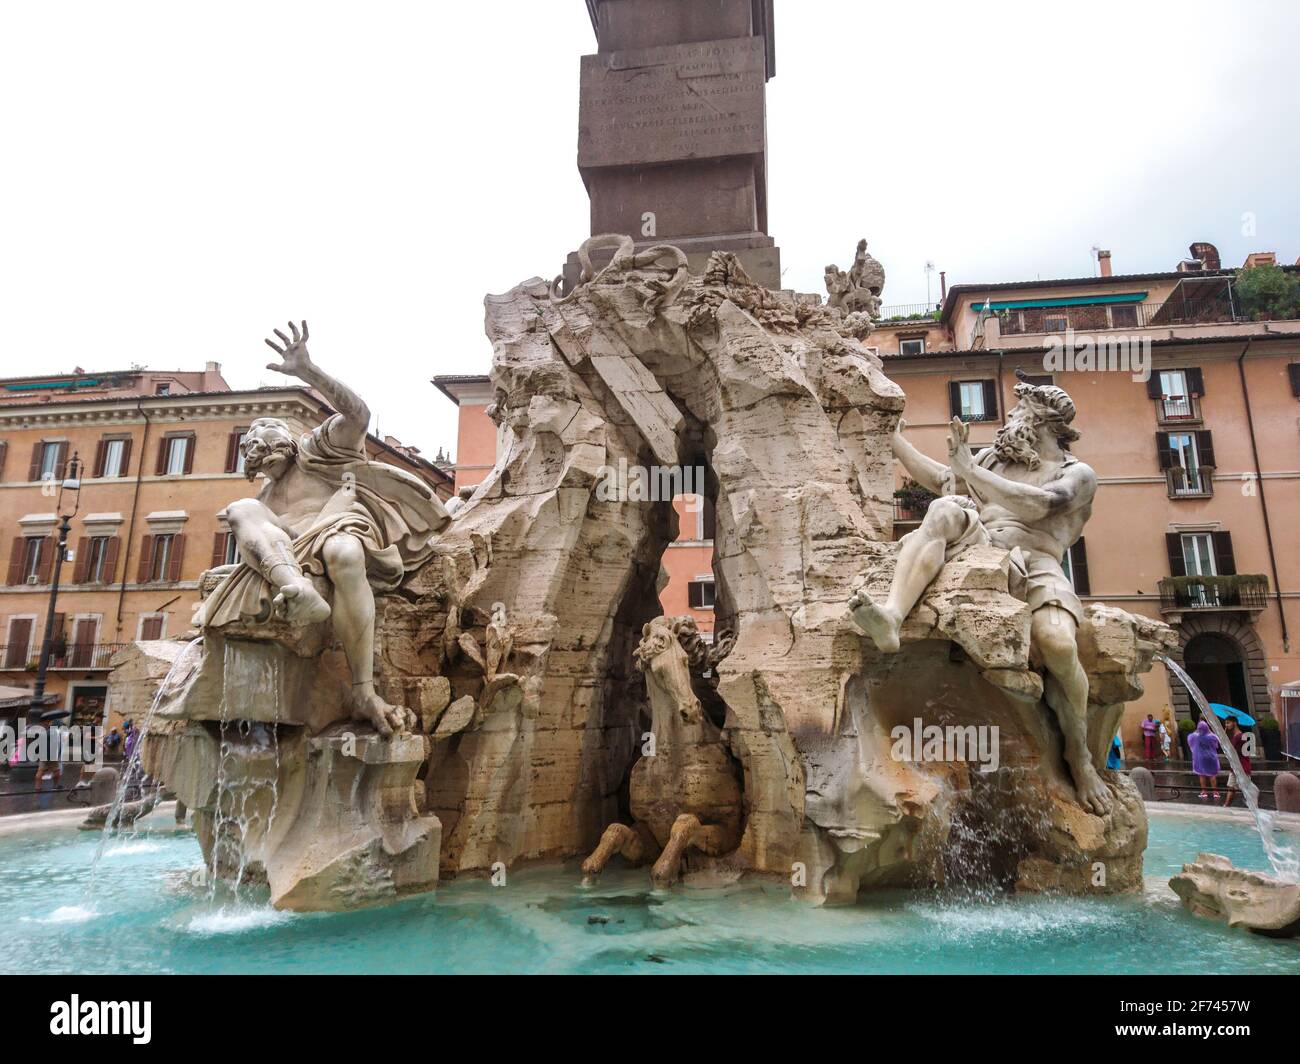 Rome, Italy - August 18, 2019: Bernini's Fountain of the Four Rivers sculptures close-up with Obelisco Agonale, ancient obelisk in the center, on clou Stock Photo